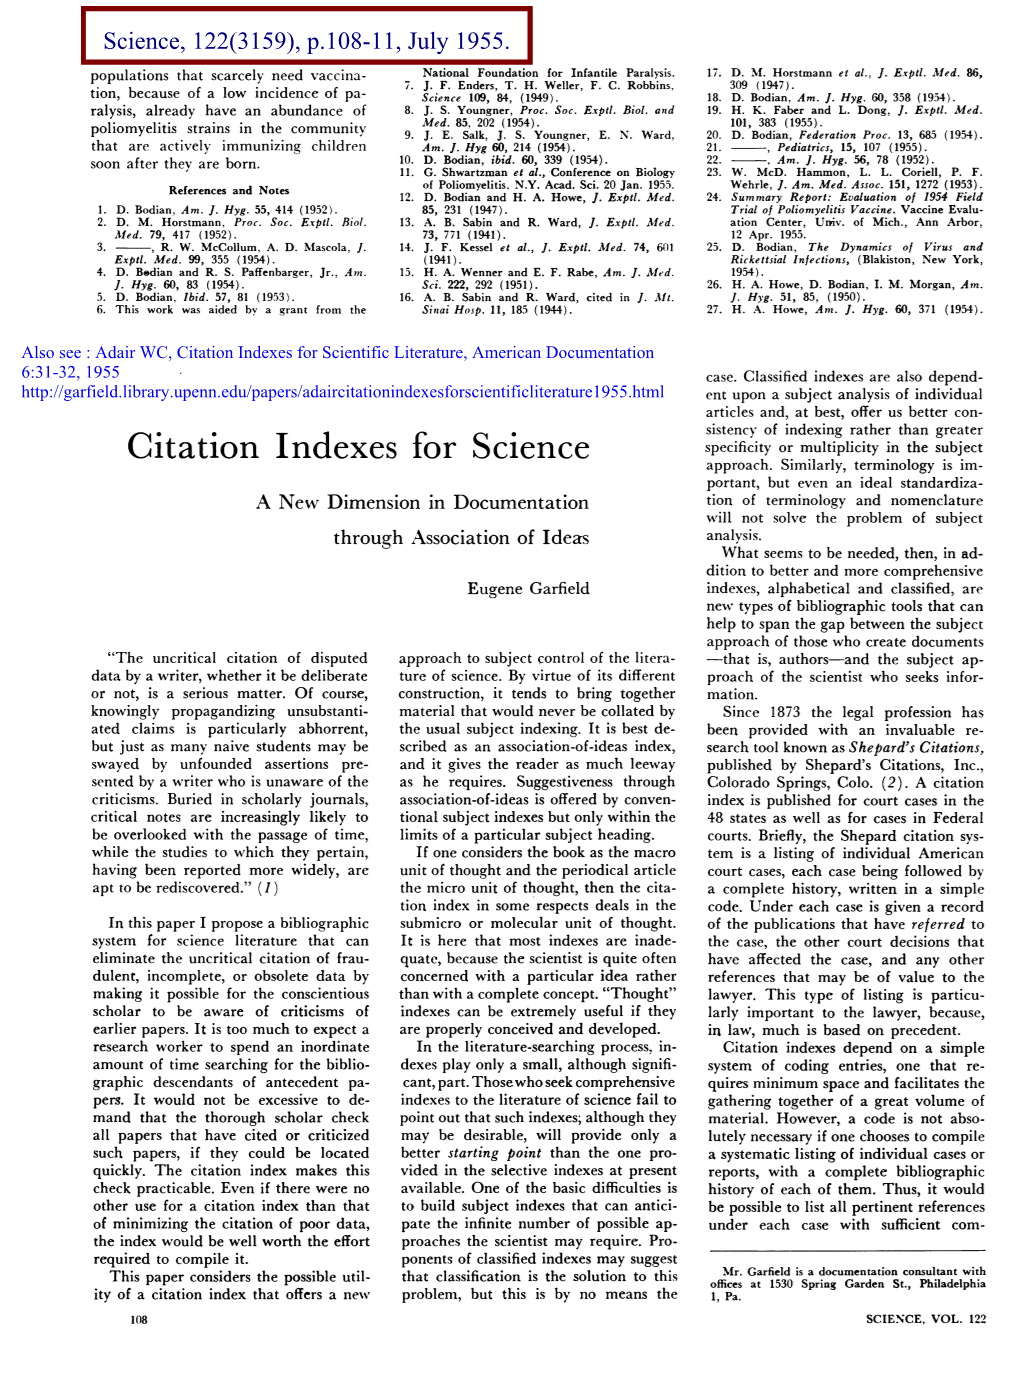 Garfield, E. "Citation Indexes for Science: a New Dimension in Documentation Through Association of Ideas." "